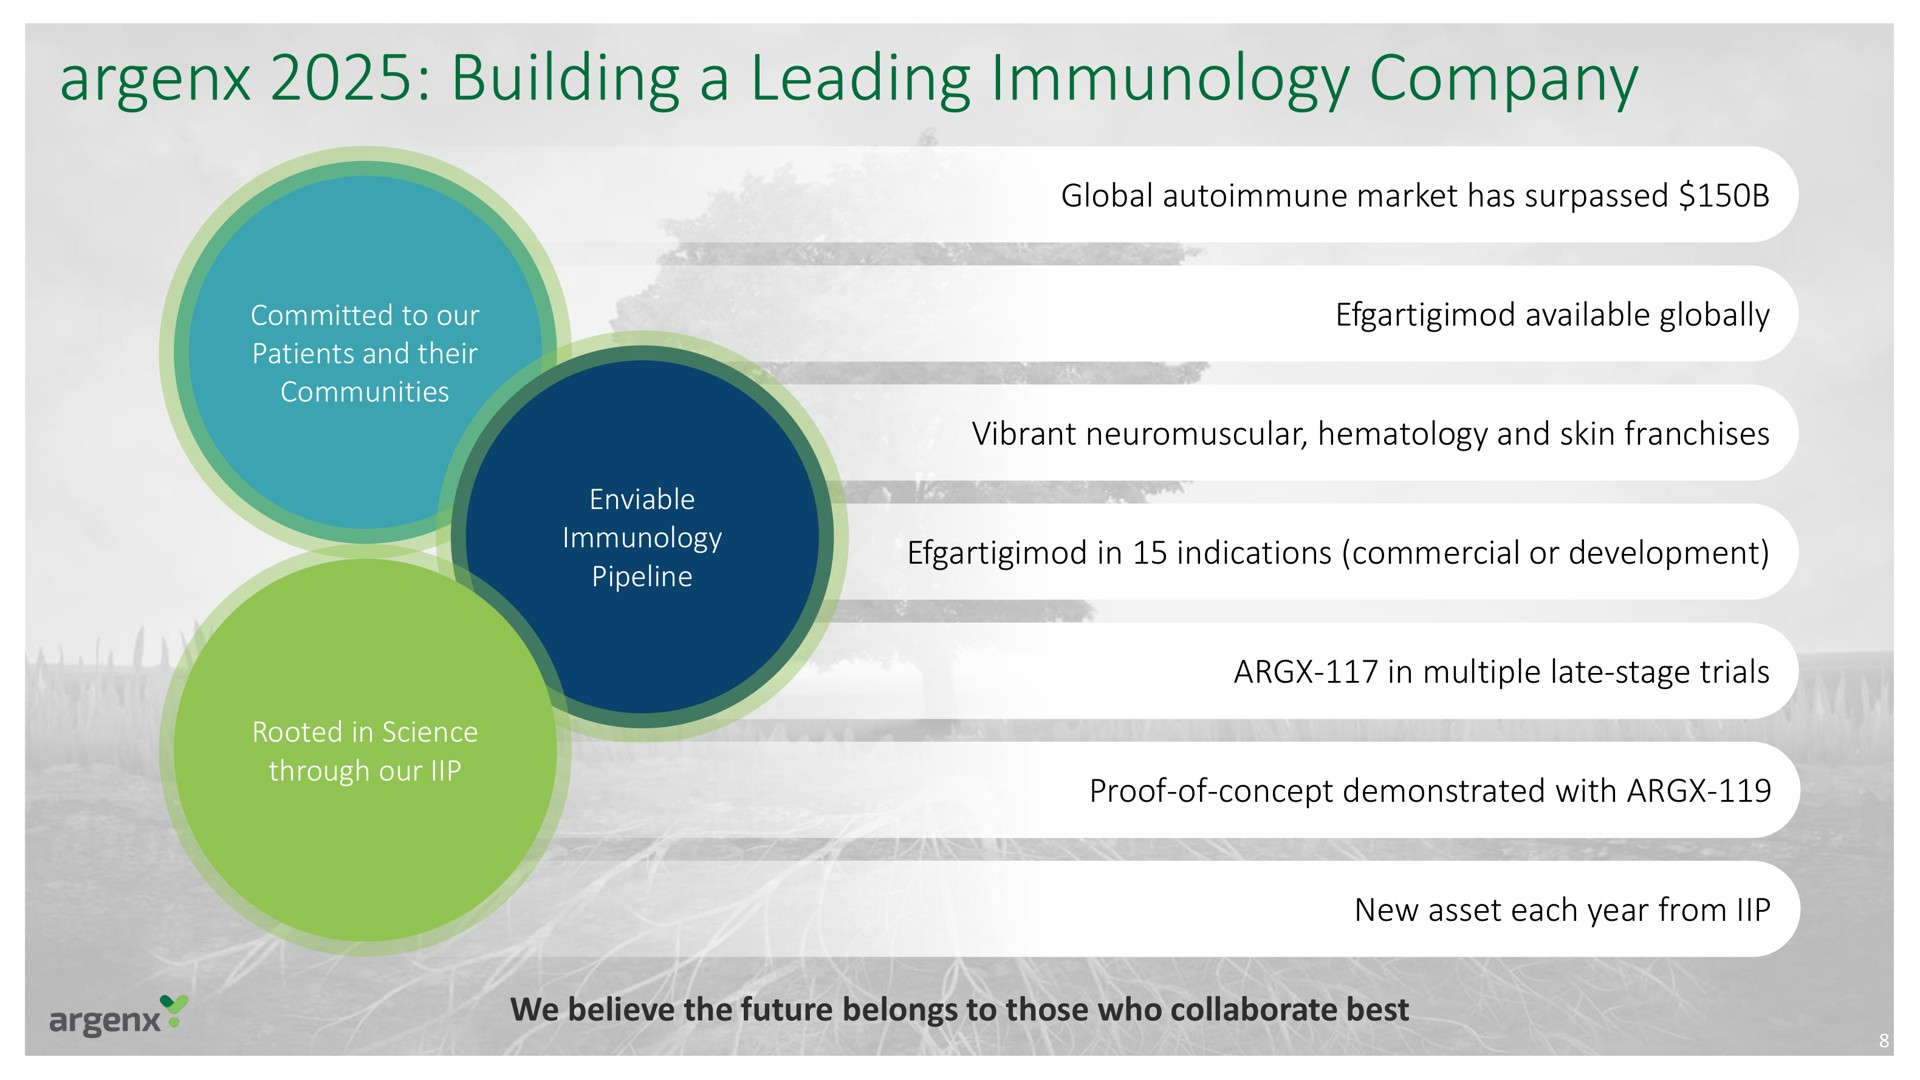 building a leading immunology company | argenx SE